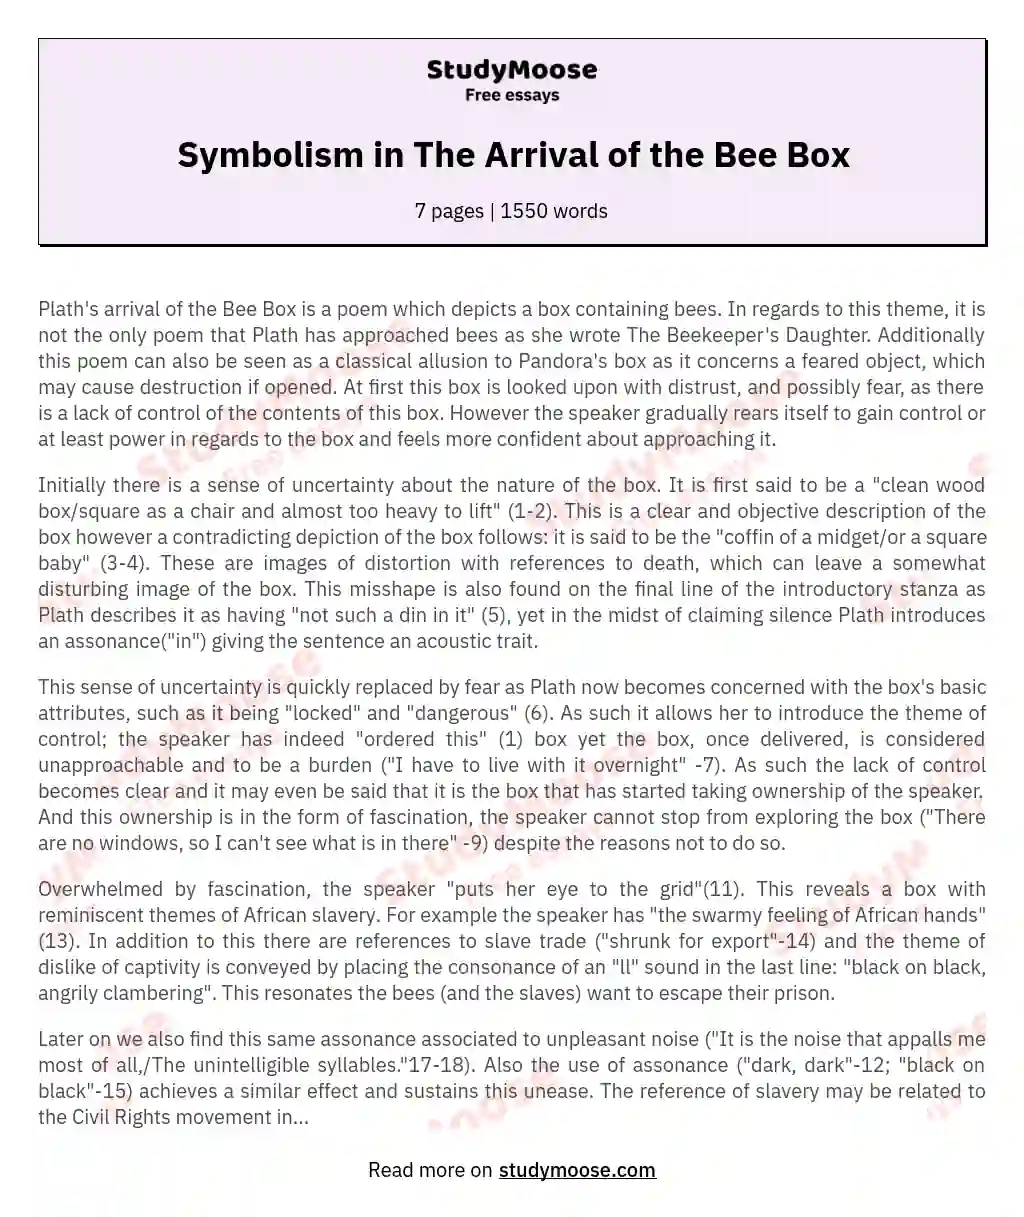 Symbolism in The Arrival of the Bee Box essay